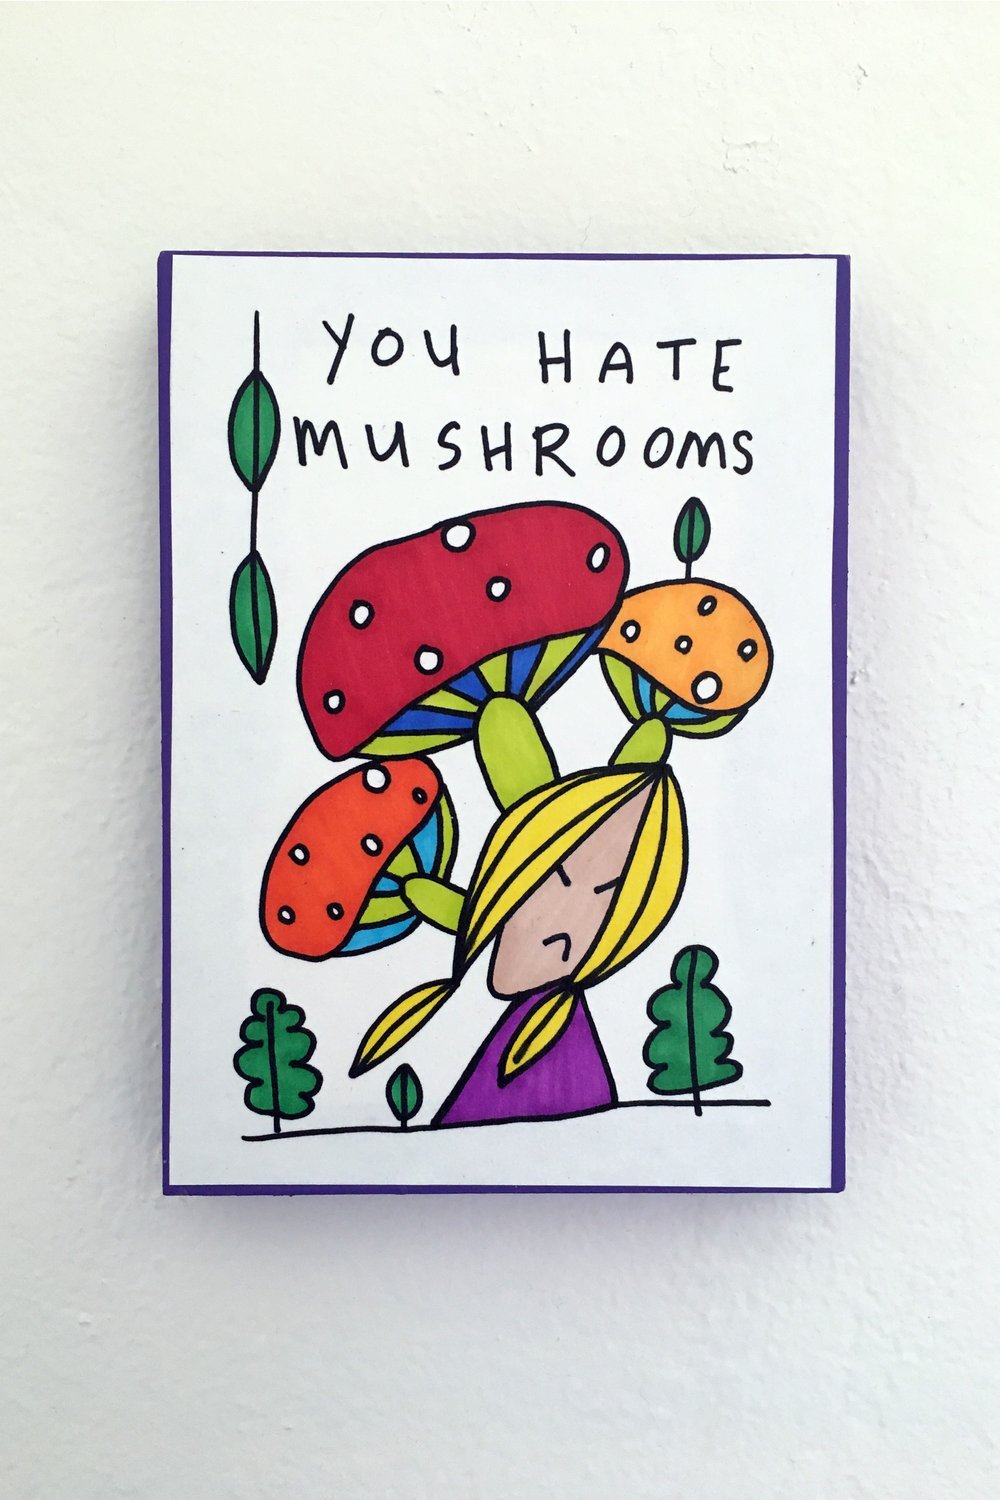 You Hate Mushrooms by Alexander & Quayle